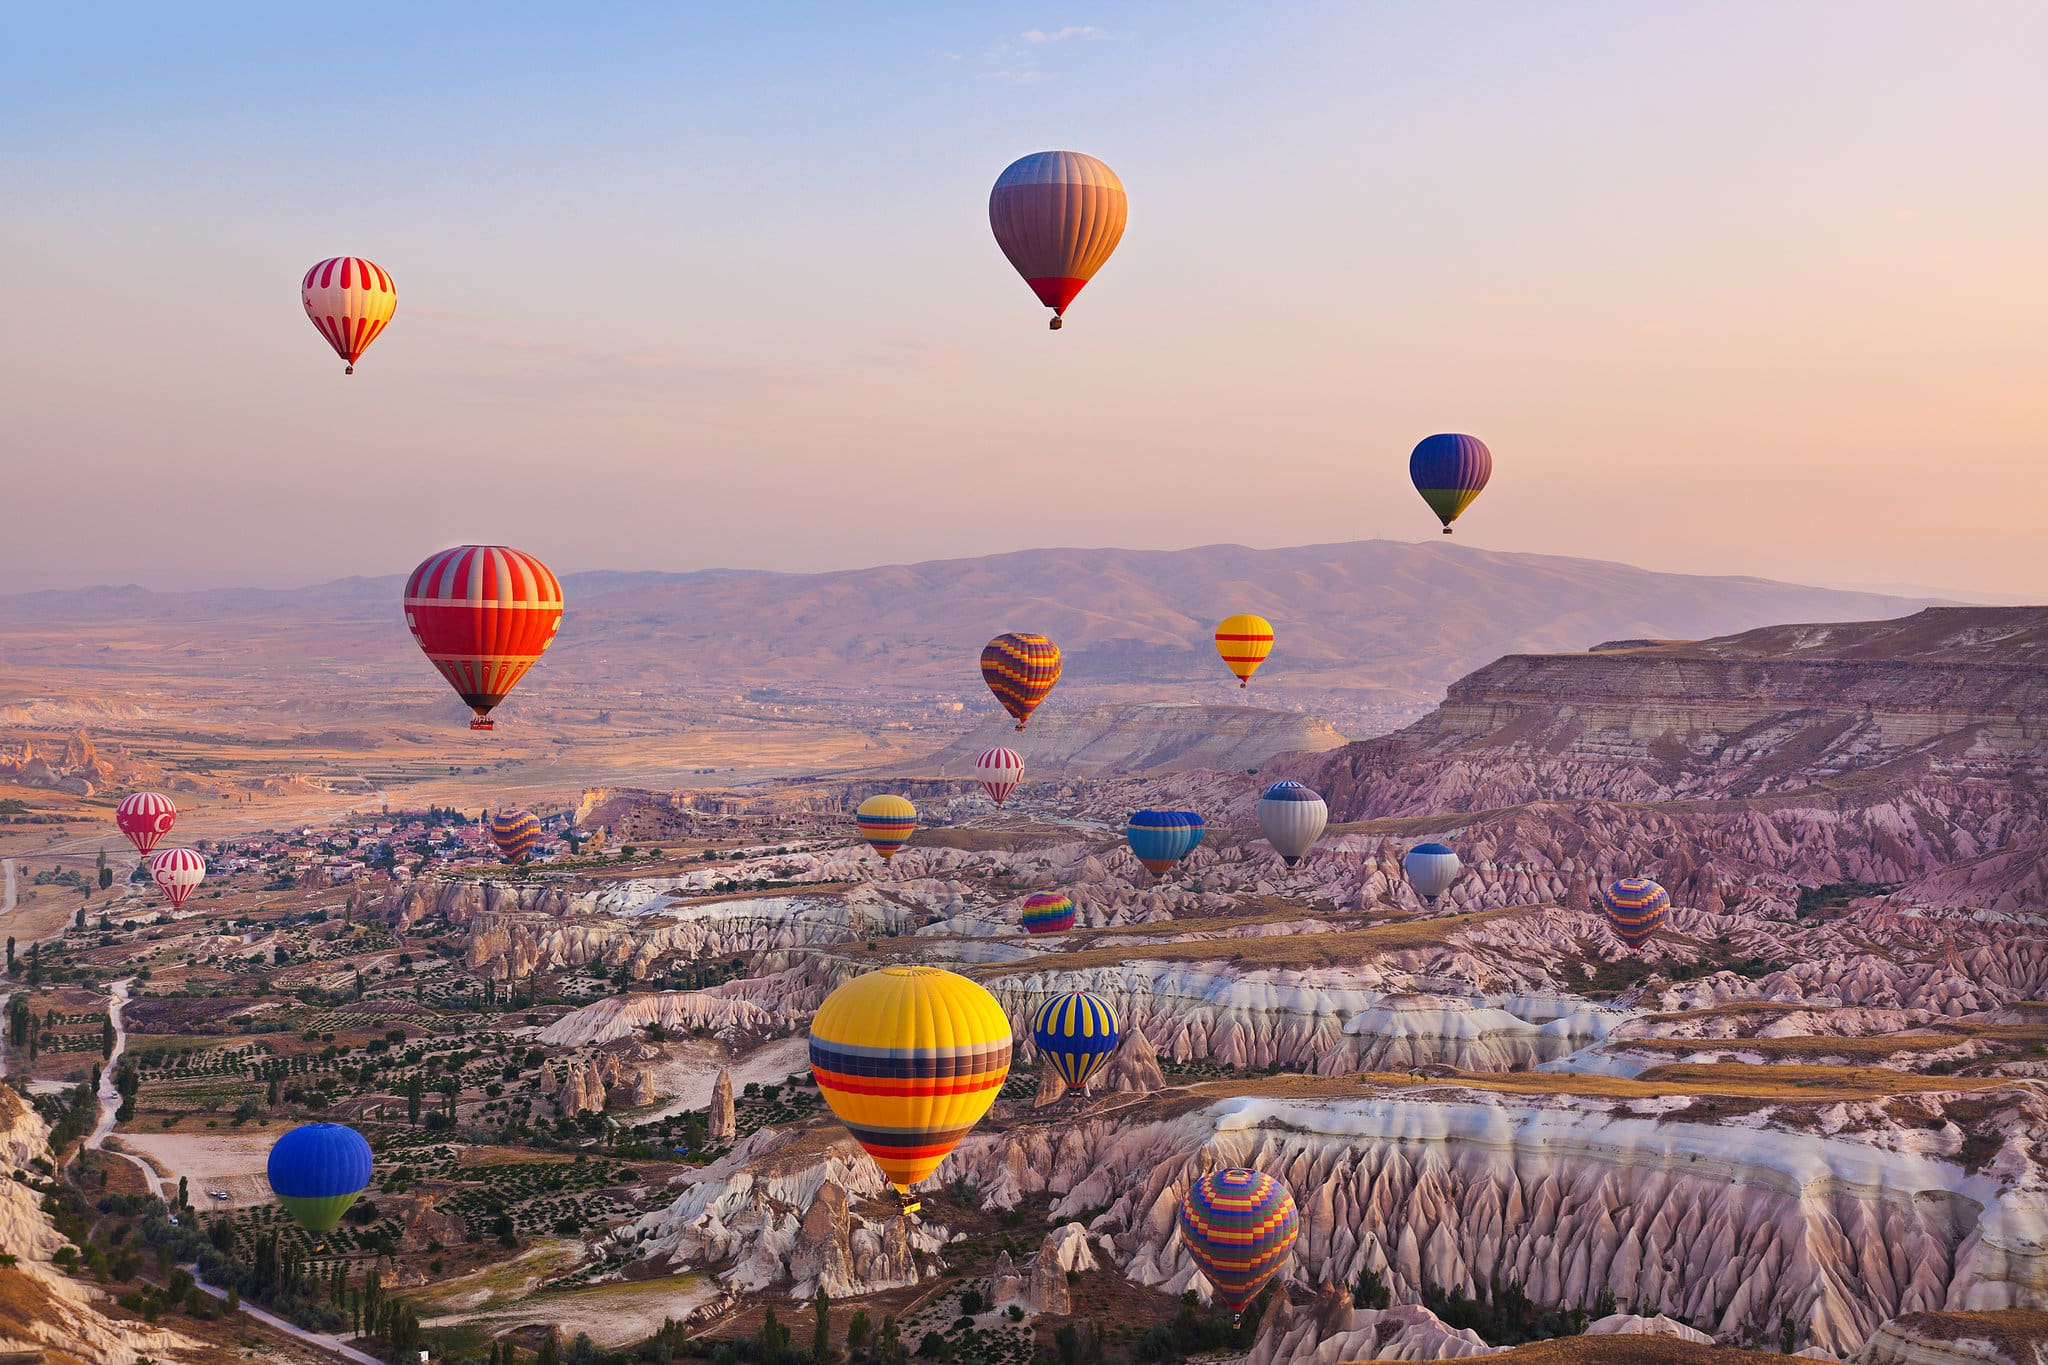 Cappadocia is a must in our travel guide to Turkey